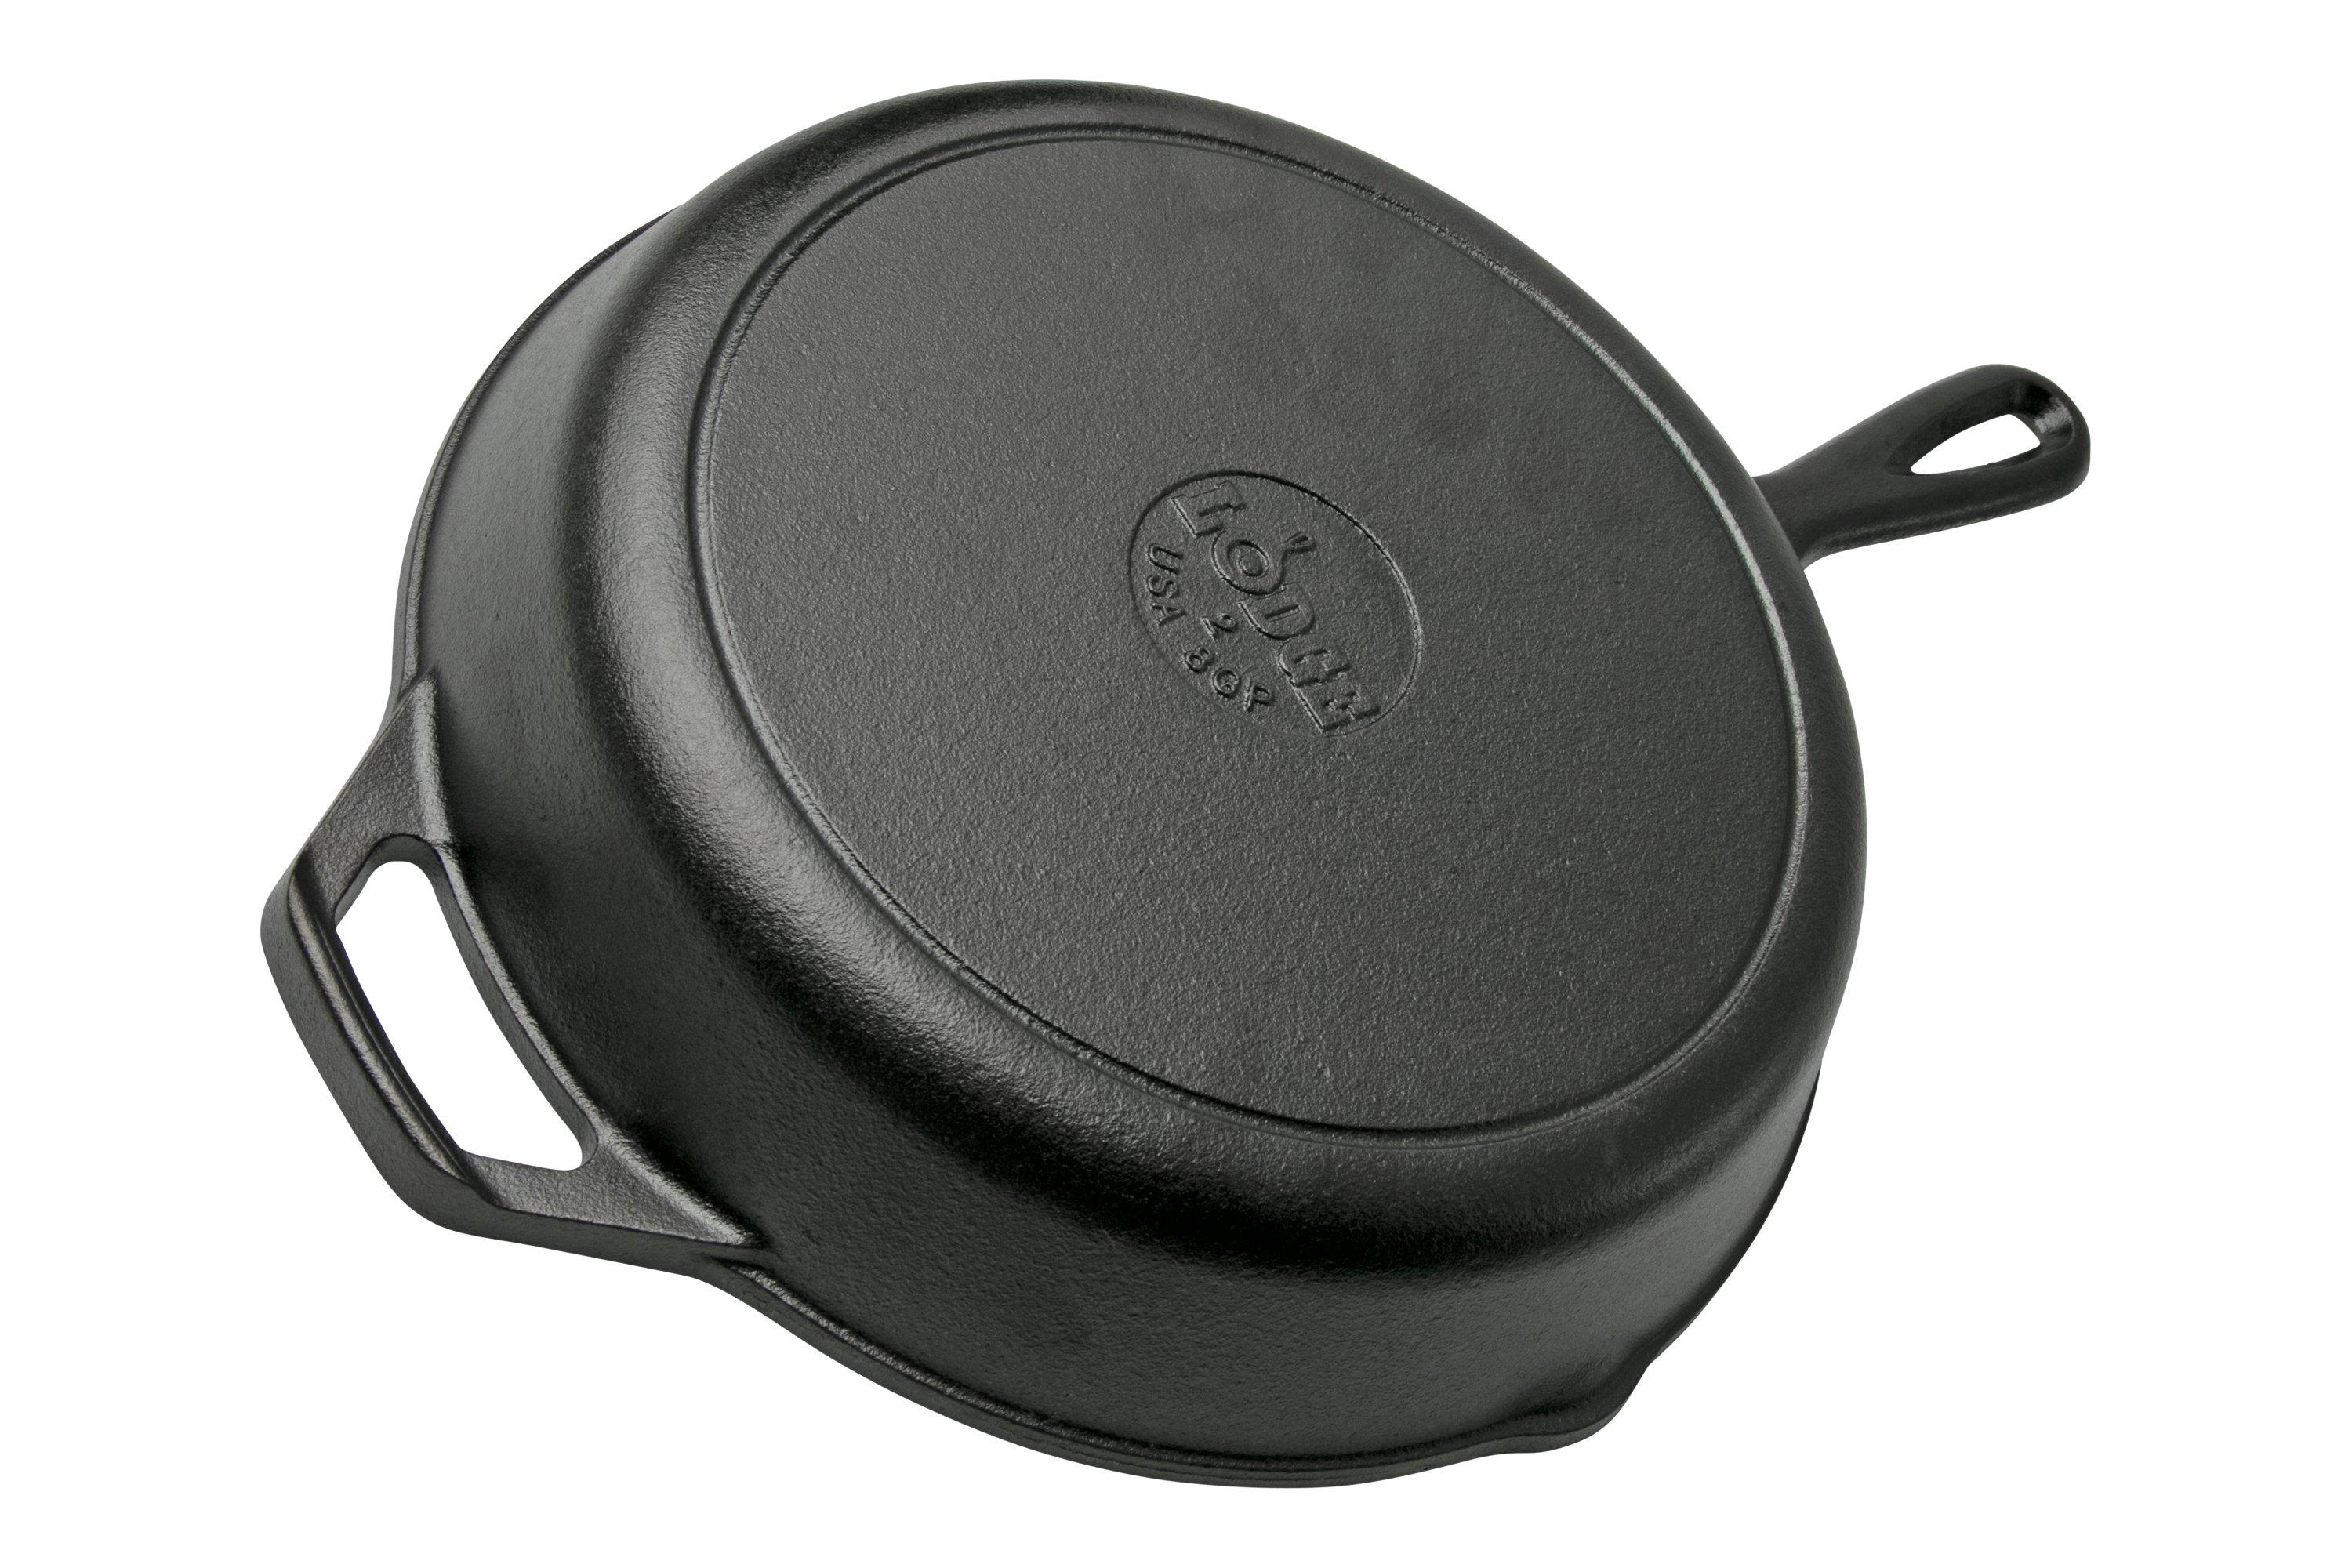 Camp Chef Square cast iron pan  Advantageously shopping at